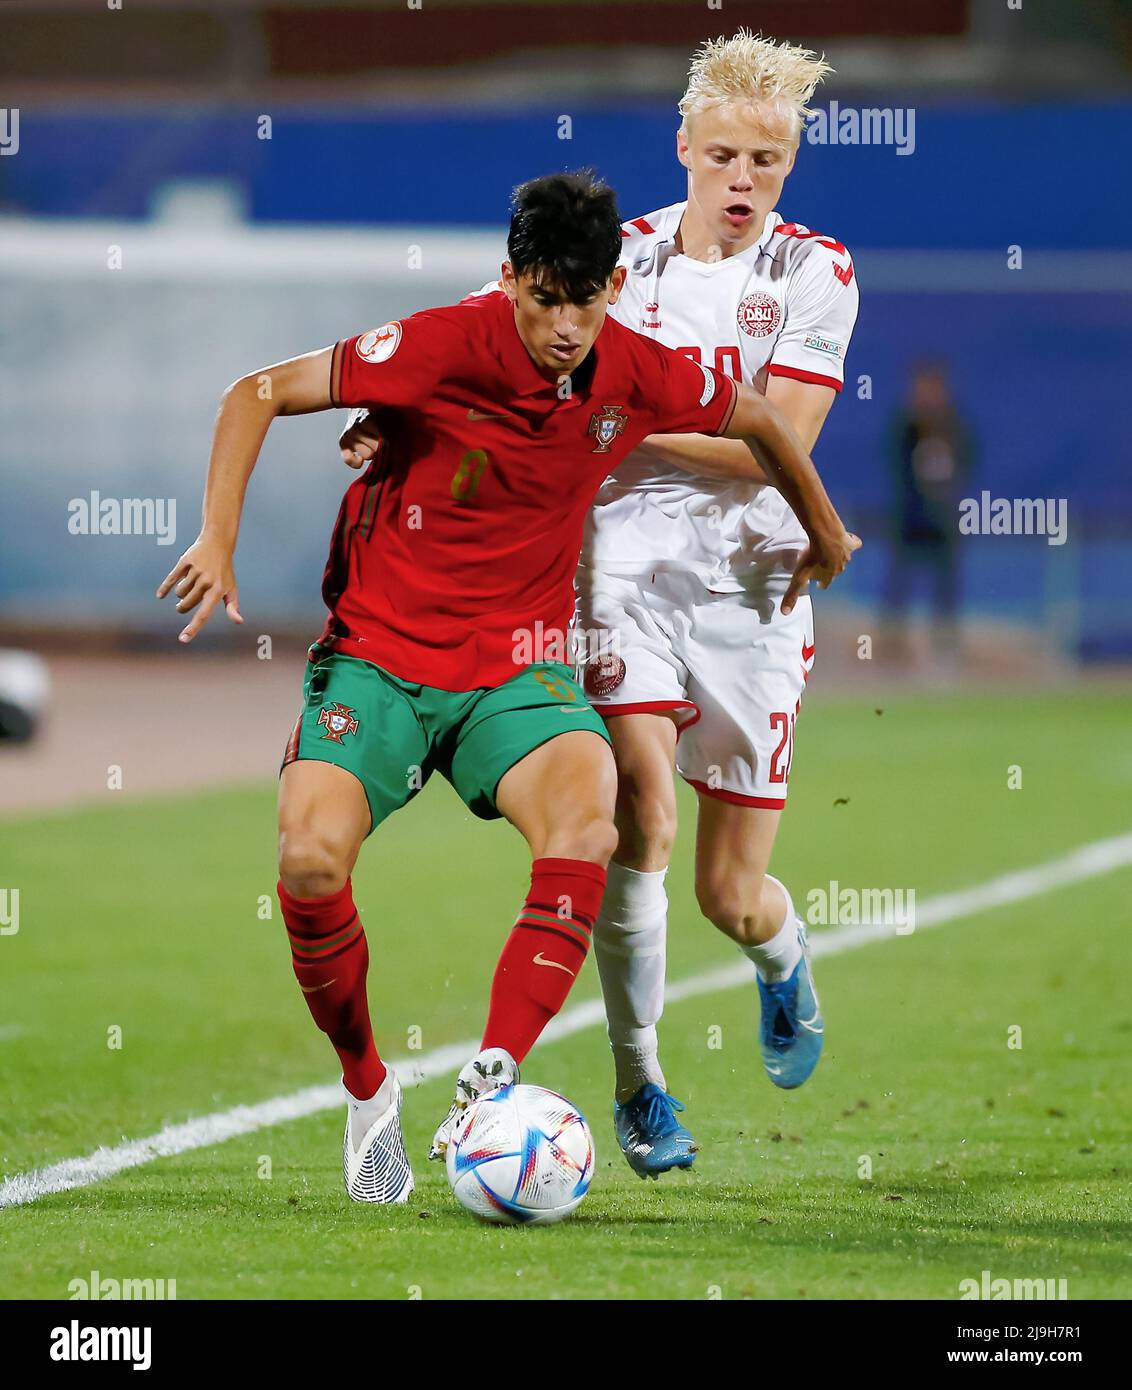 Tel Aviv, Israel. 23rd May, 2022. João Miguel Fins Veloso (8 Portugal) and Oscar O. Hojlund (20 Denmark) battle for the ball (duel) during the UEFA Under 17 European Championship 2022 football match between Portugal and Denmark at Ramat-Gan-Stadium in Tel Aviv, Israel. Alan Shiver/SPP Credit: SPP Sport Press Photo. /Alamy Live News Stock Photo